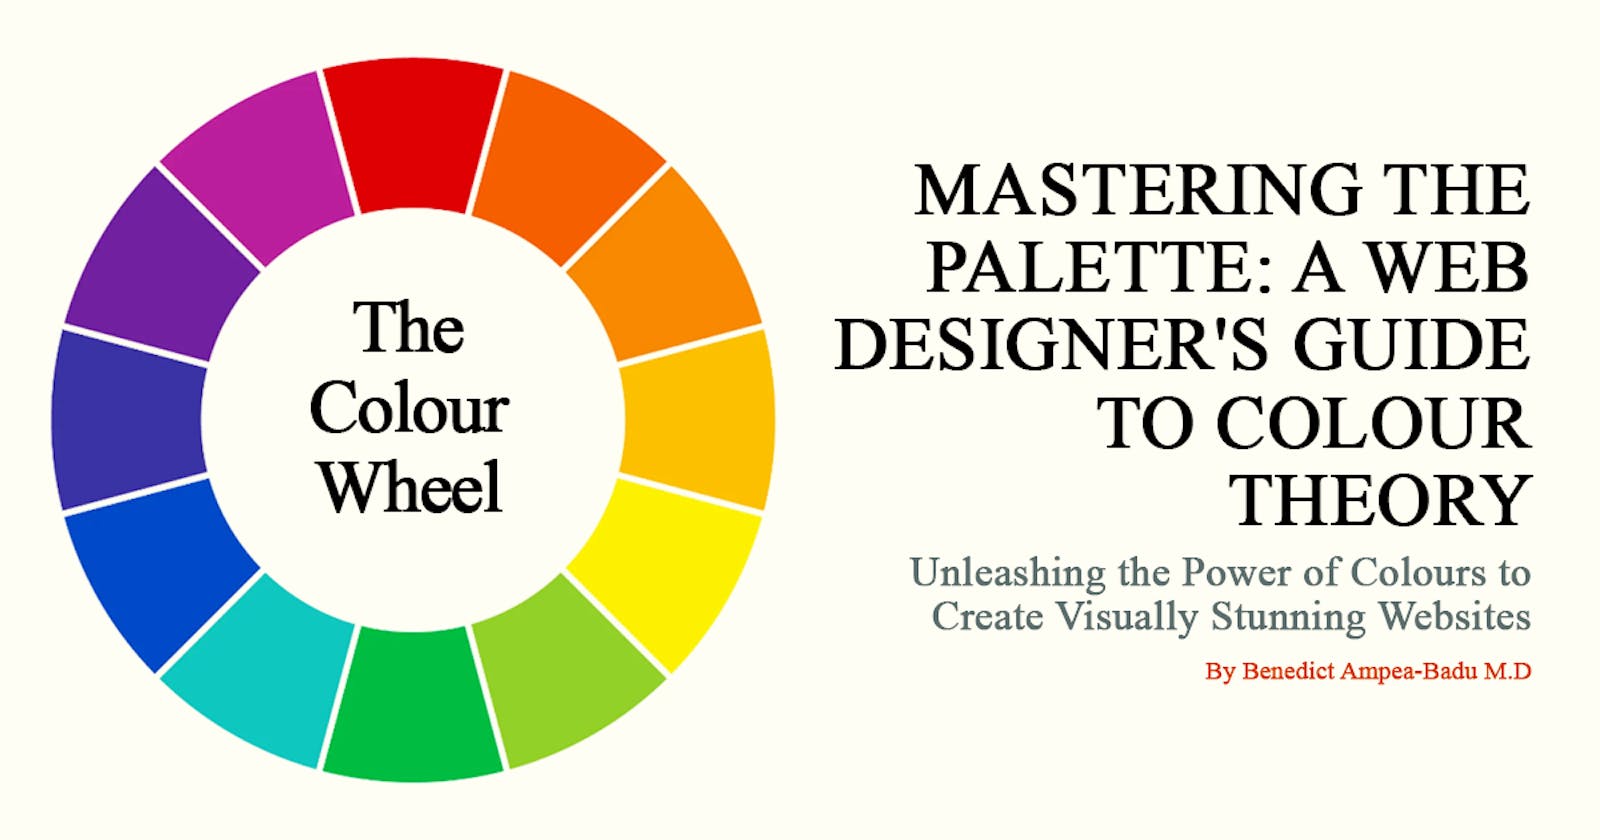 Mastering The Palette: A Web Designer's Guide to Colour Theory